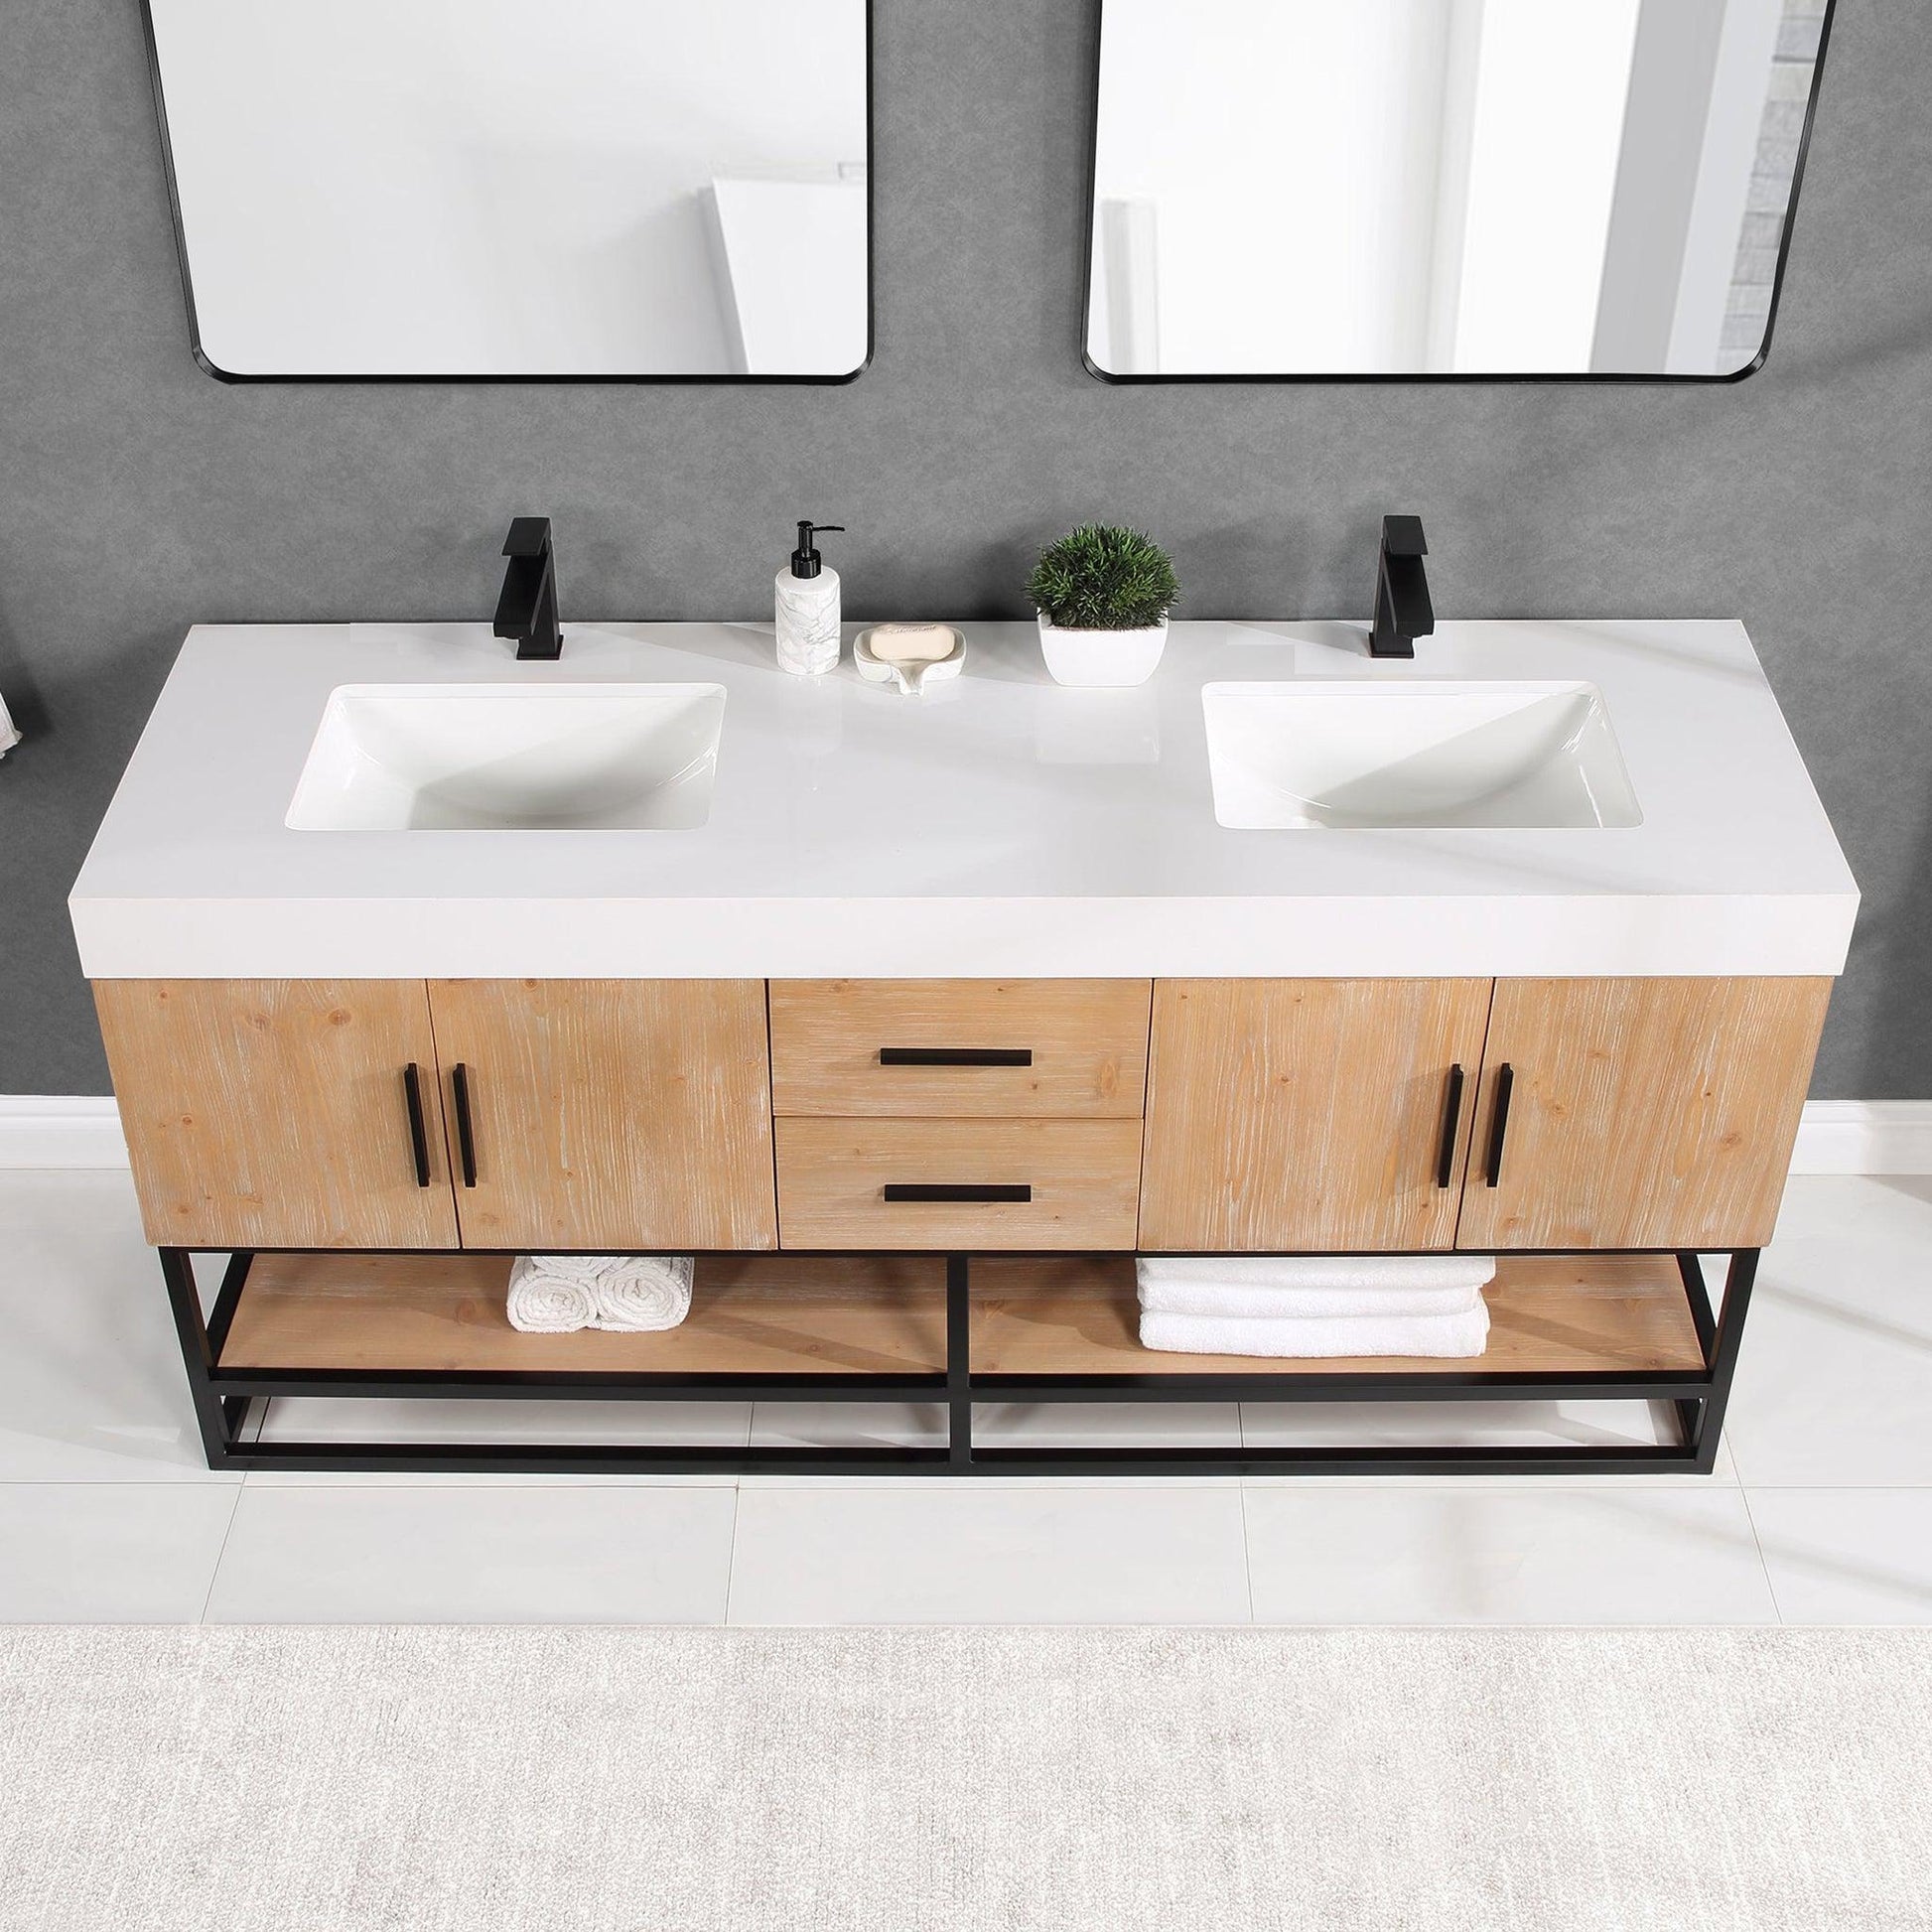 Altair Bianco 72" Light Brown Freestanding Double Bathroom Vanity Set With Matte Black Support Base, White Composite Stone Top, Two Rectangular Undermount Ceramic Sinks, and Overflow